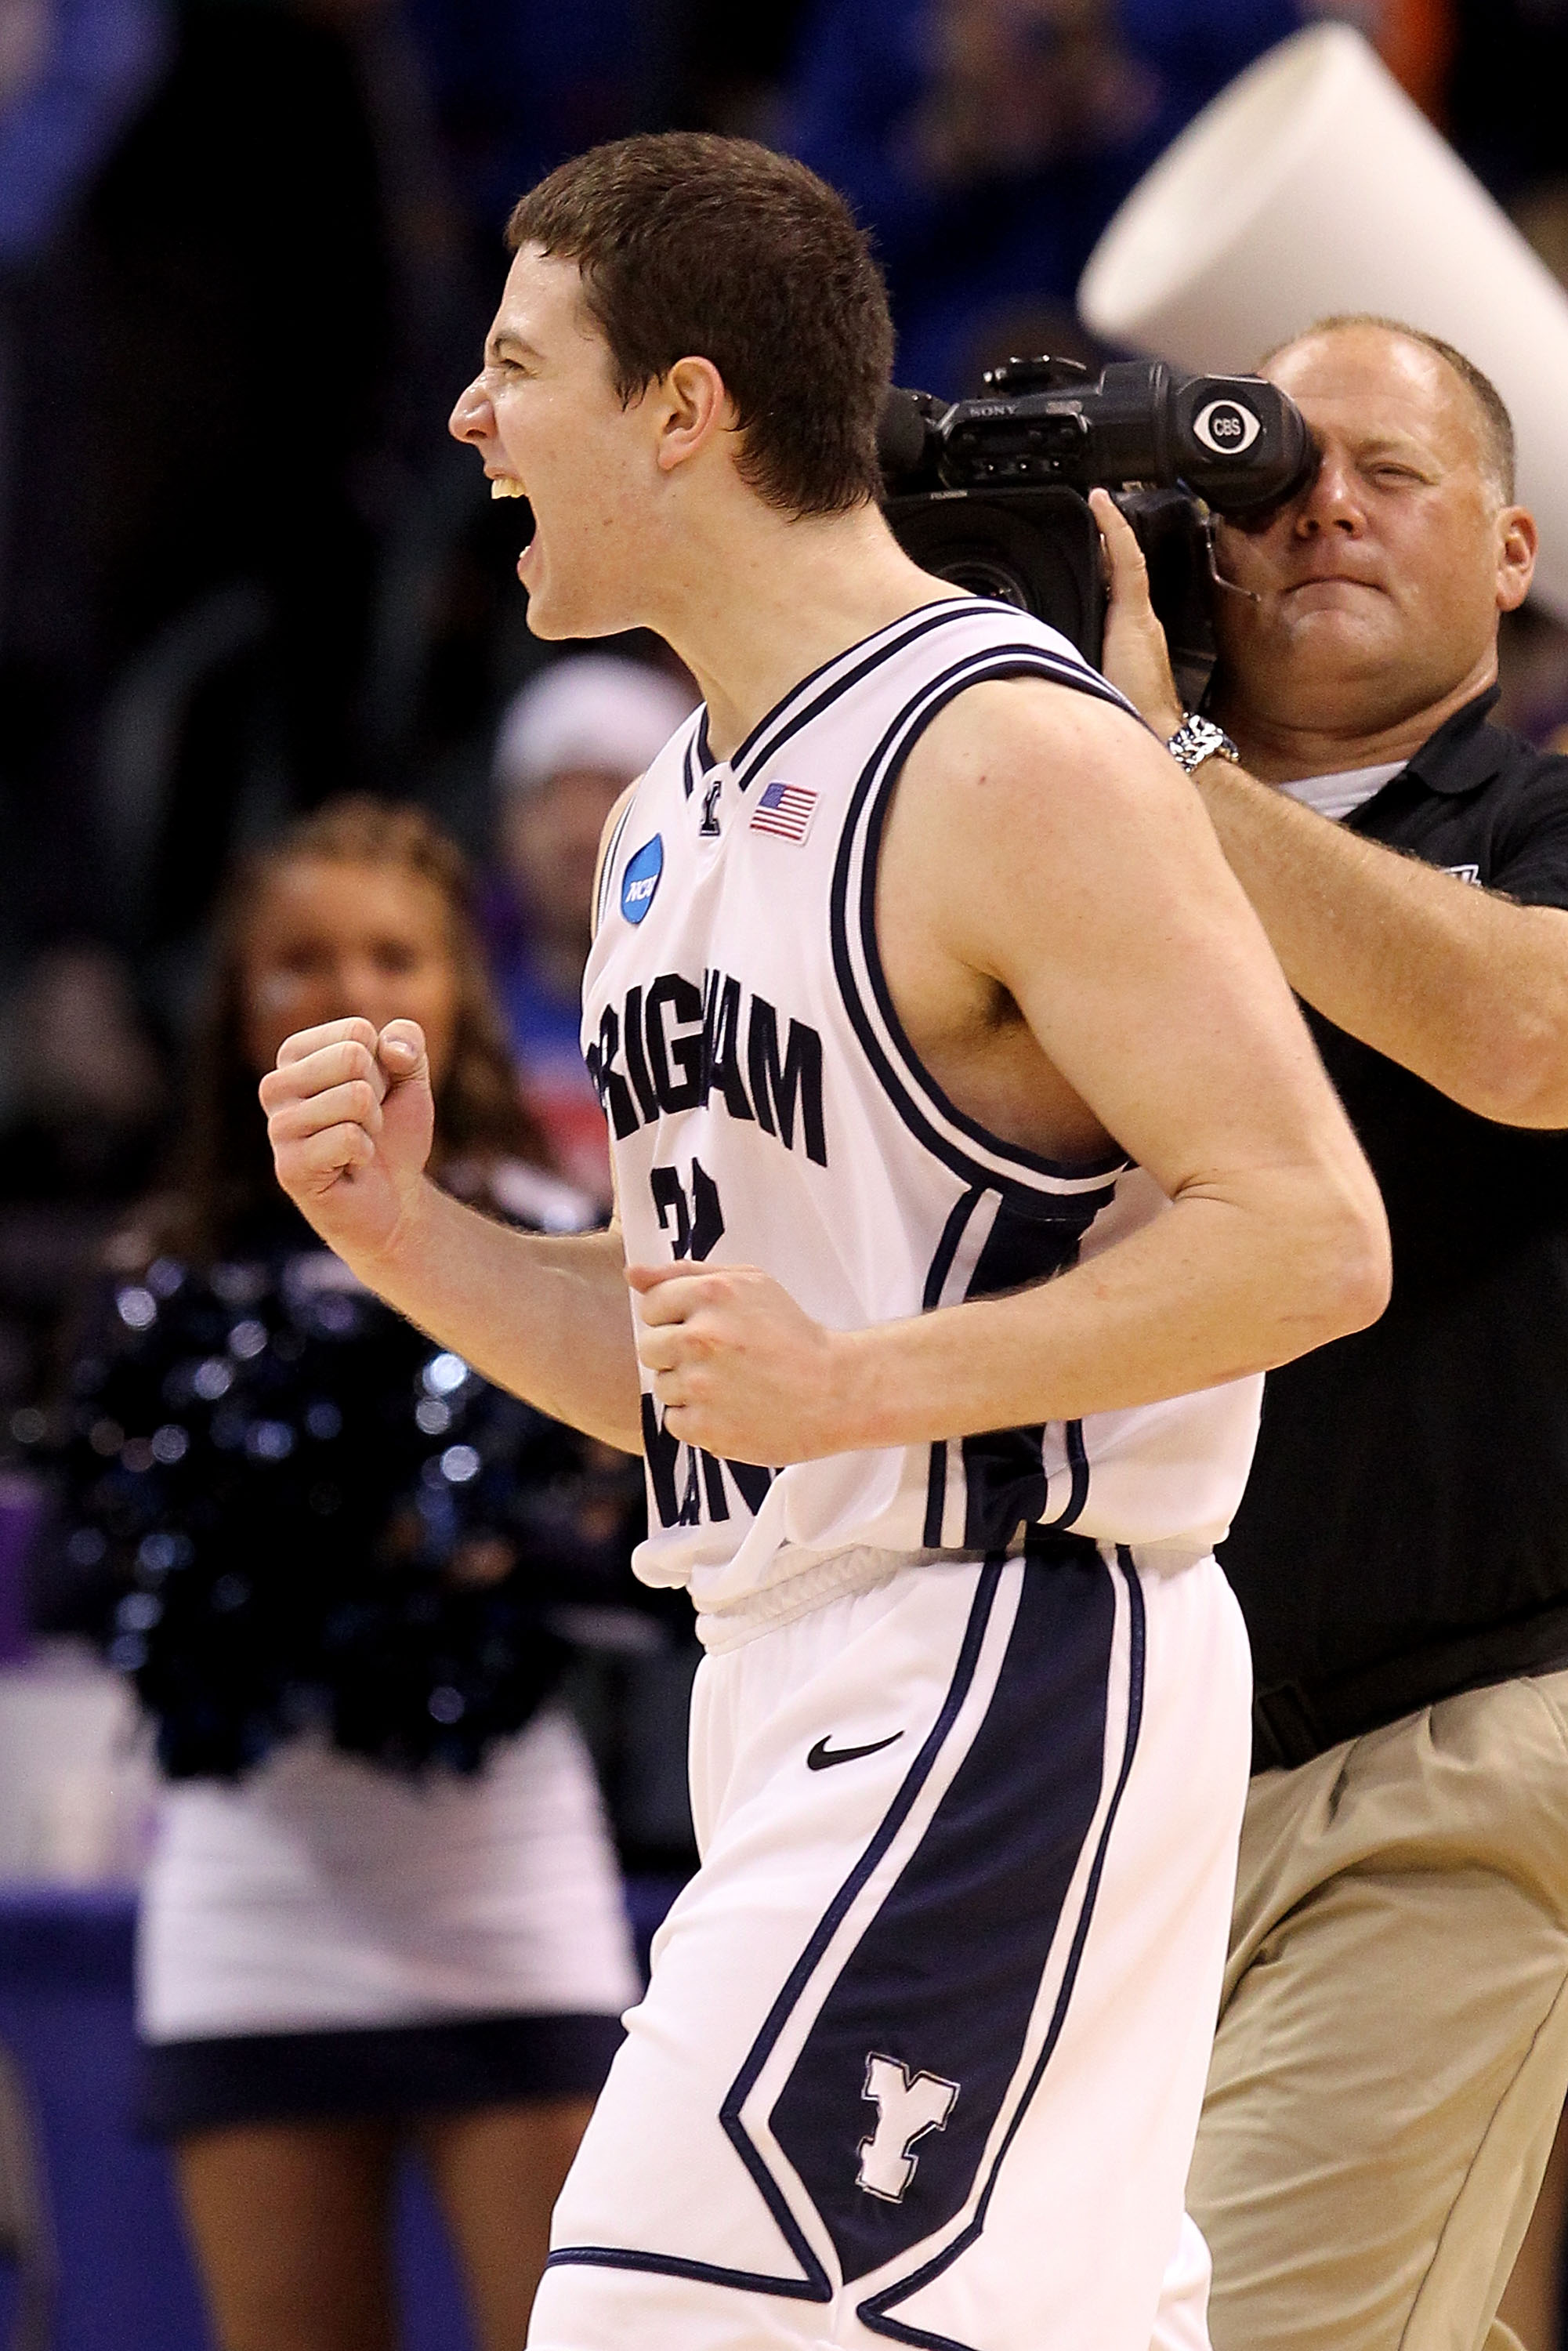 OKLAHOMA CITY - MARCH 18:  Jimmer Fredette #32 of the BYU Cougars celebrates after BYU won in 99-92 double in overtime against the Florida Gators during the first round of the 2010 NCAA men�s basketball tournament at Ford Center on March 18, 2010 in Oklah